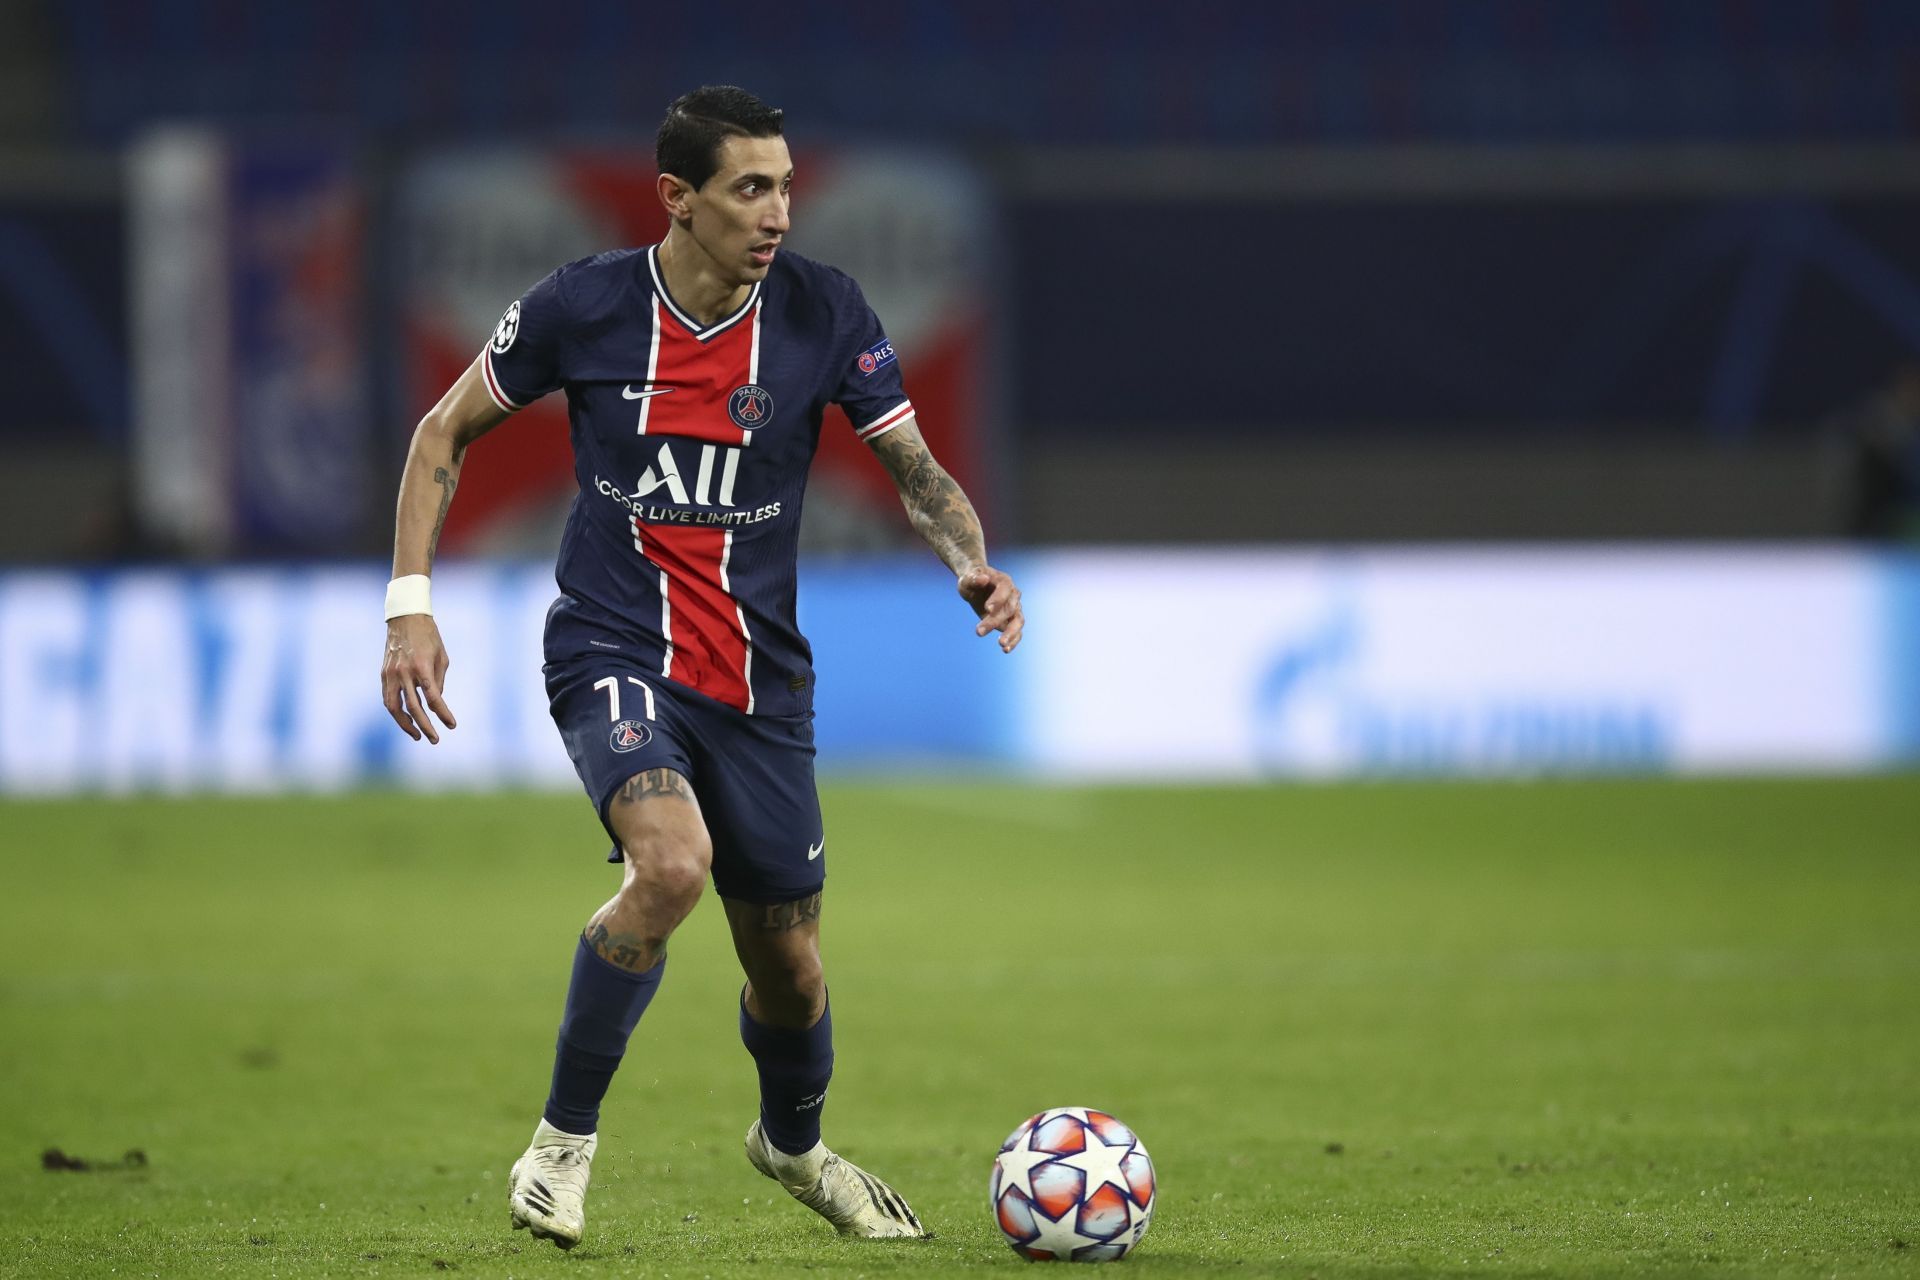 Angel Di Maria will be a key player for PSG in their Champions League encounter.